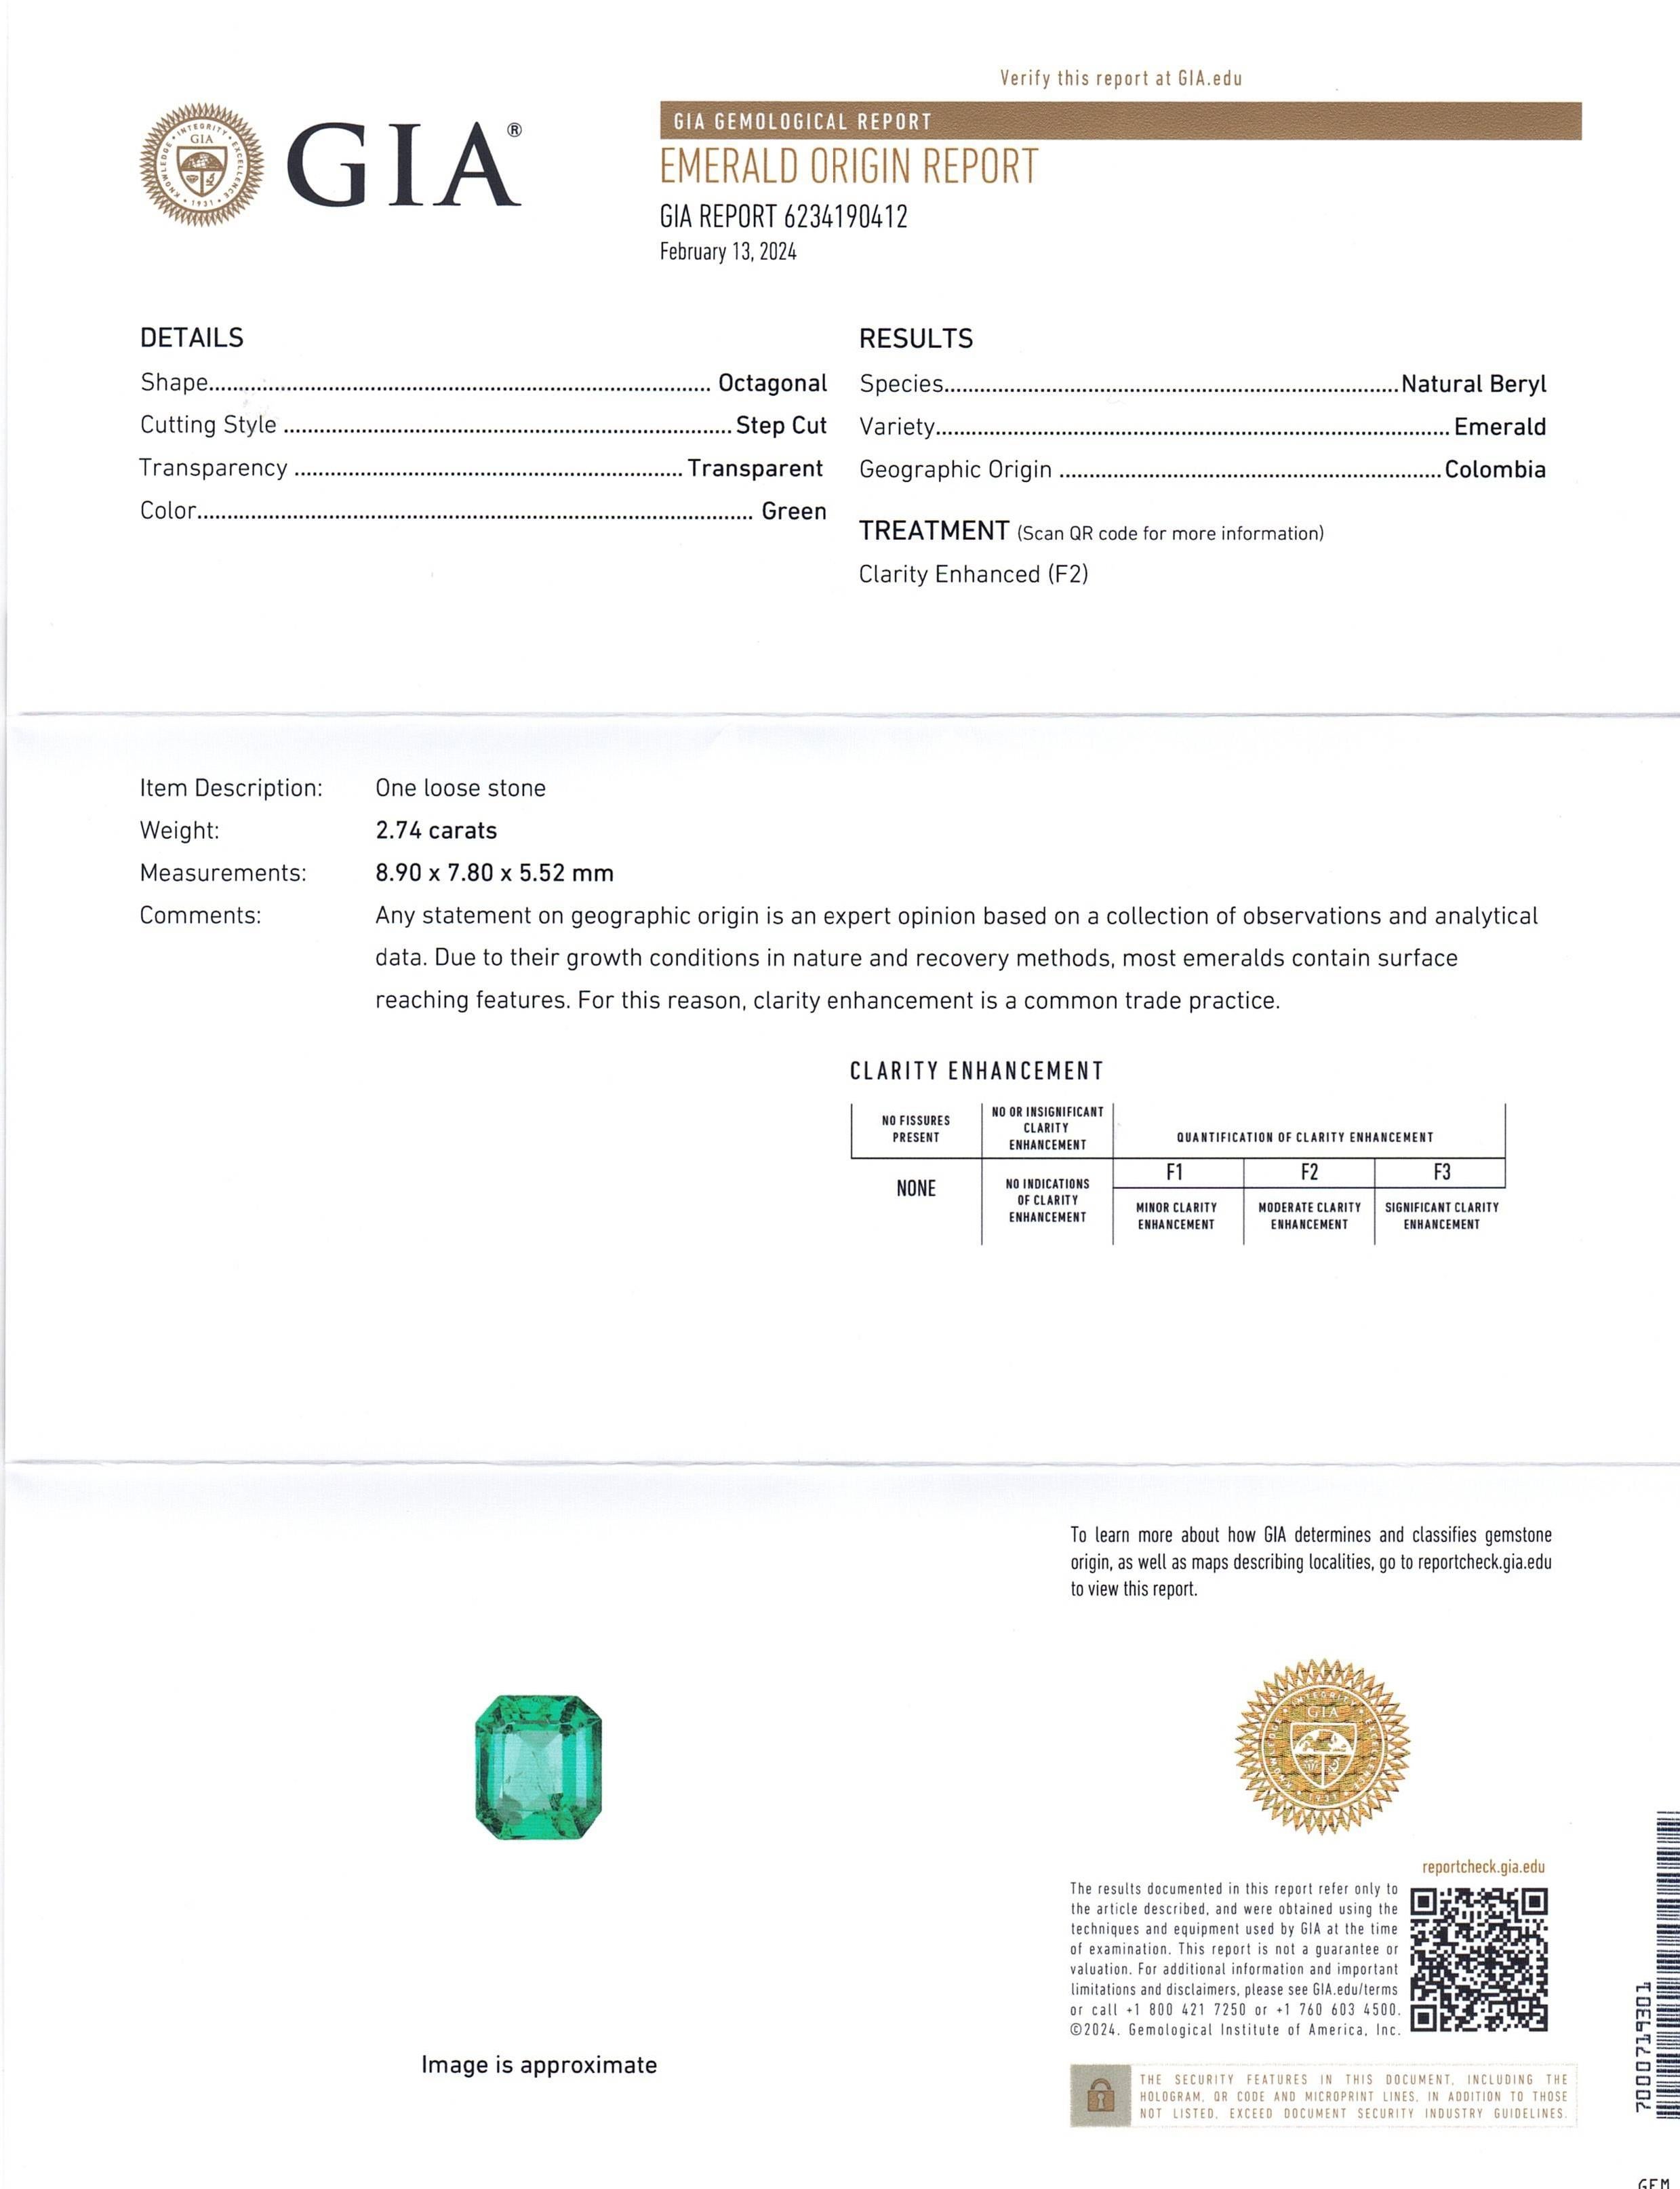 This is a stunning GIA Certified Emerald 


The GIA report reads as follows:

GIA Report Number: 6234190412
Shape: Octagonal
Cutting Style: Step Cut
Cutting Style: Crown: 
Cutting Style: Pavilion: 
Transparency: Transparent
Colour: